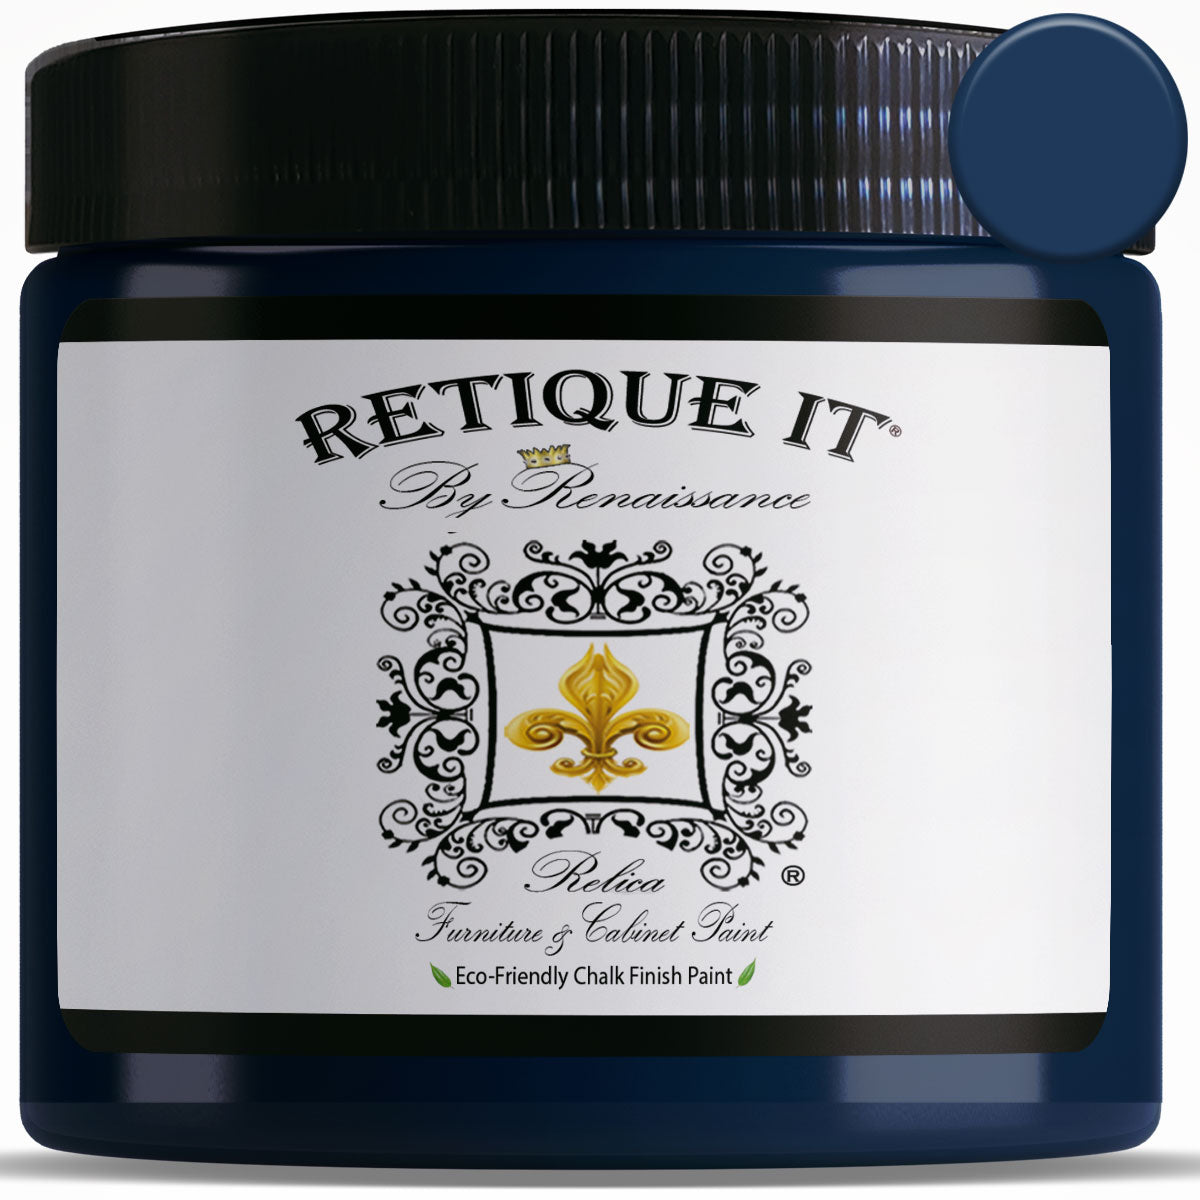 Retique It All-In-One Chalk Based Paint Ultratique for Furniture & Cabinets, 32 oz (Quart), 07 Midnight Black, 32 fl oz